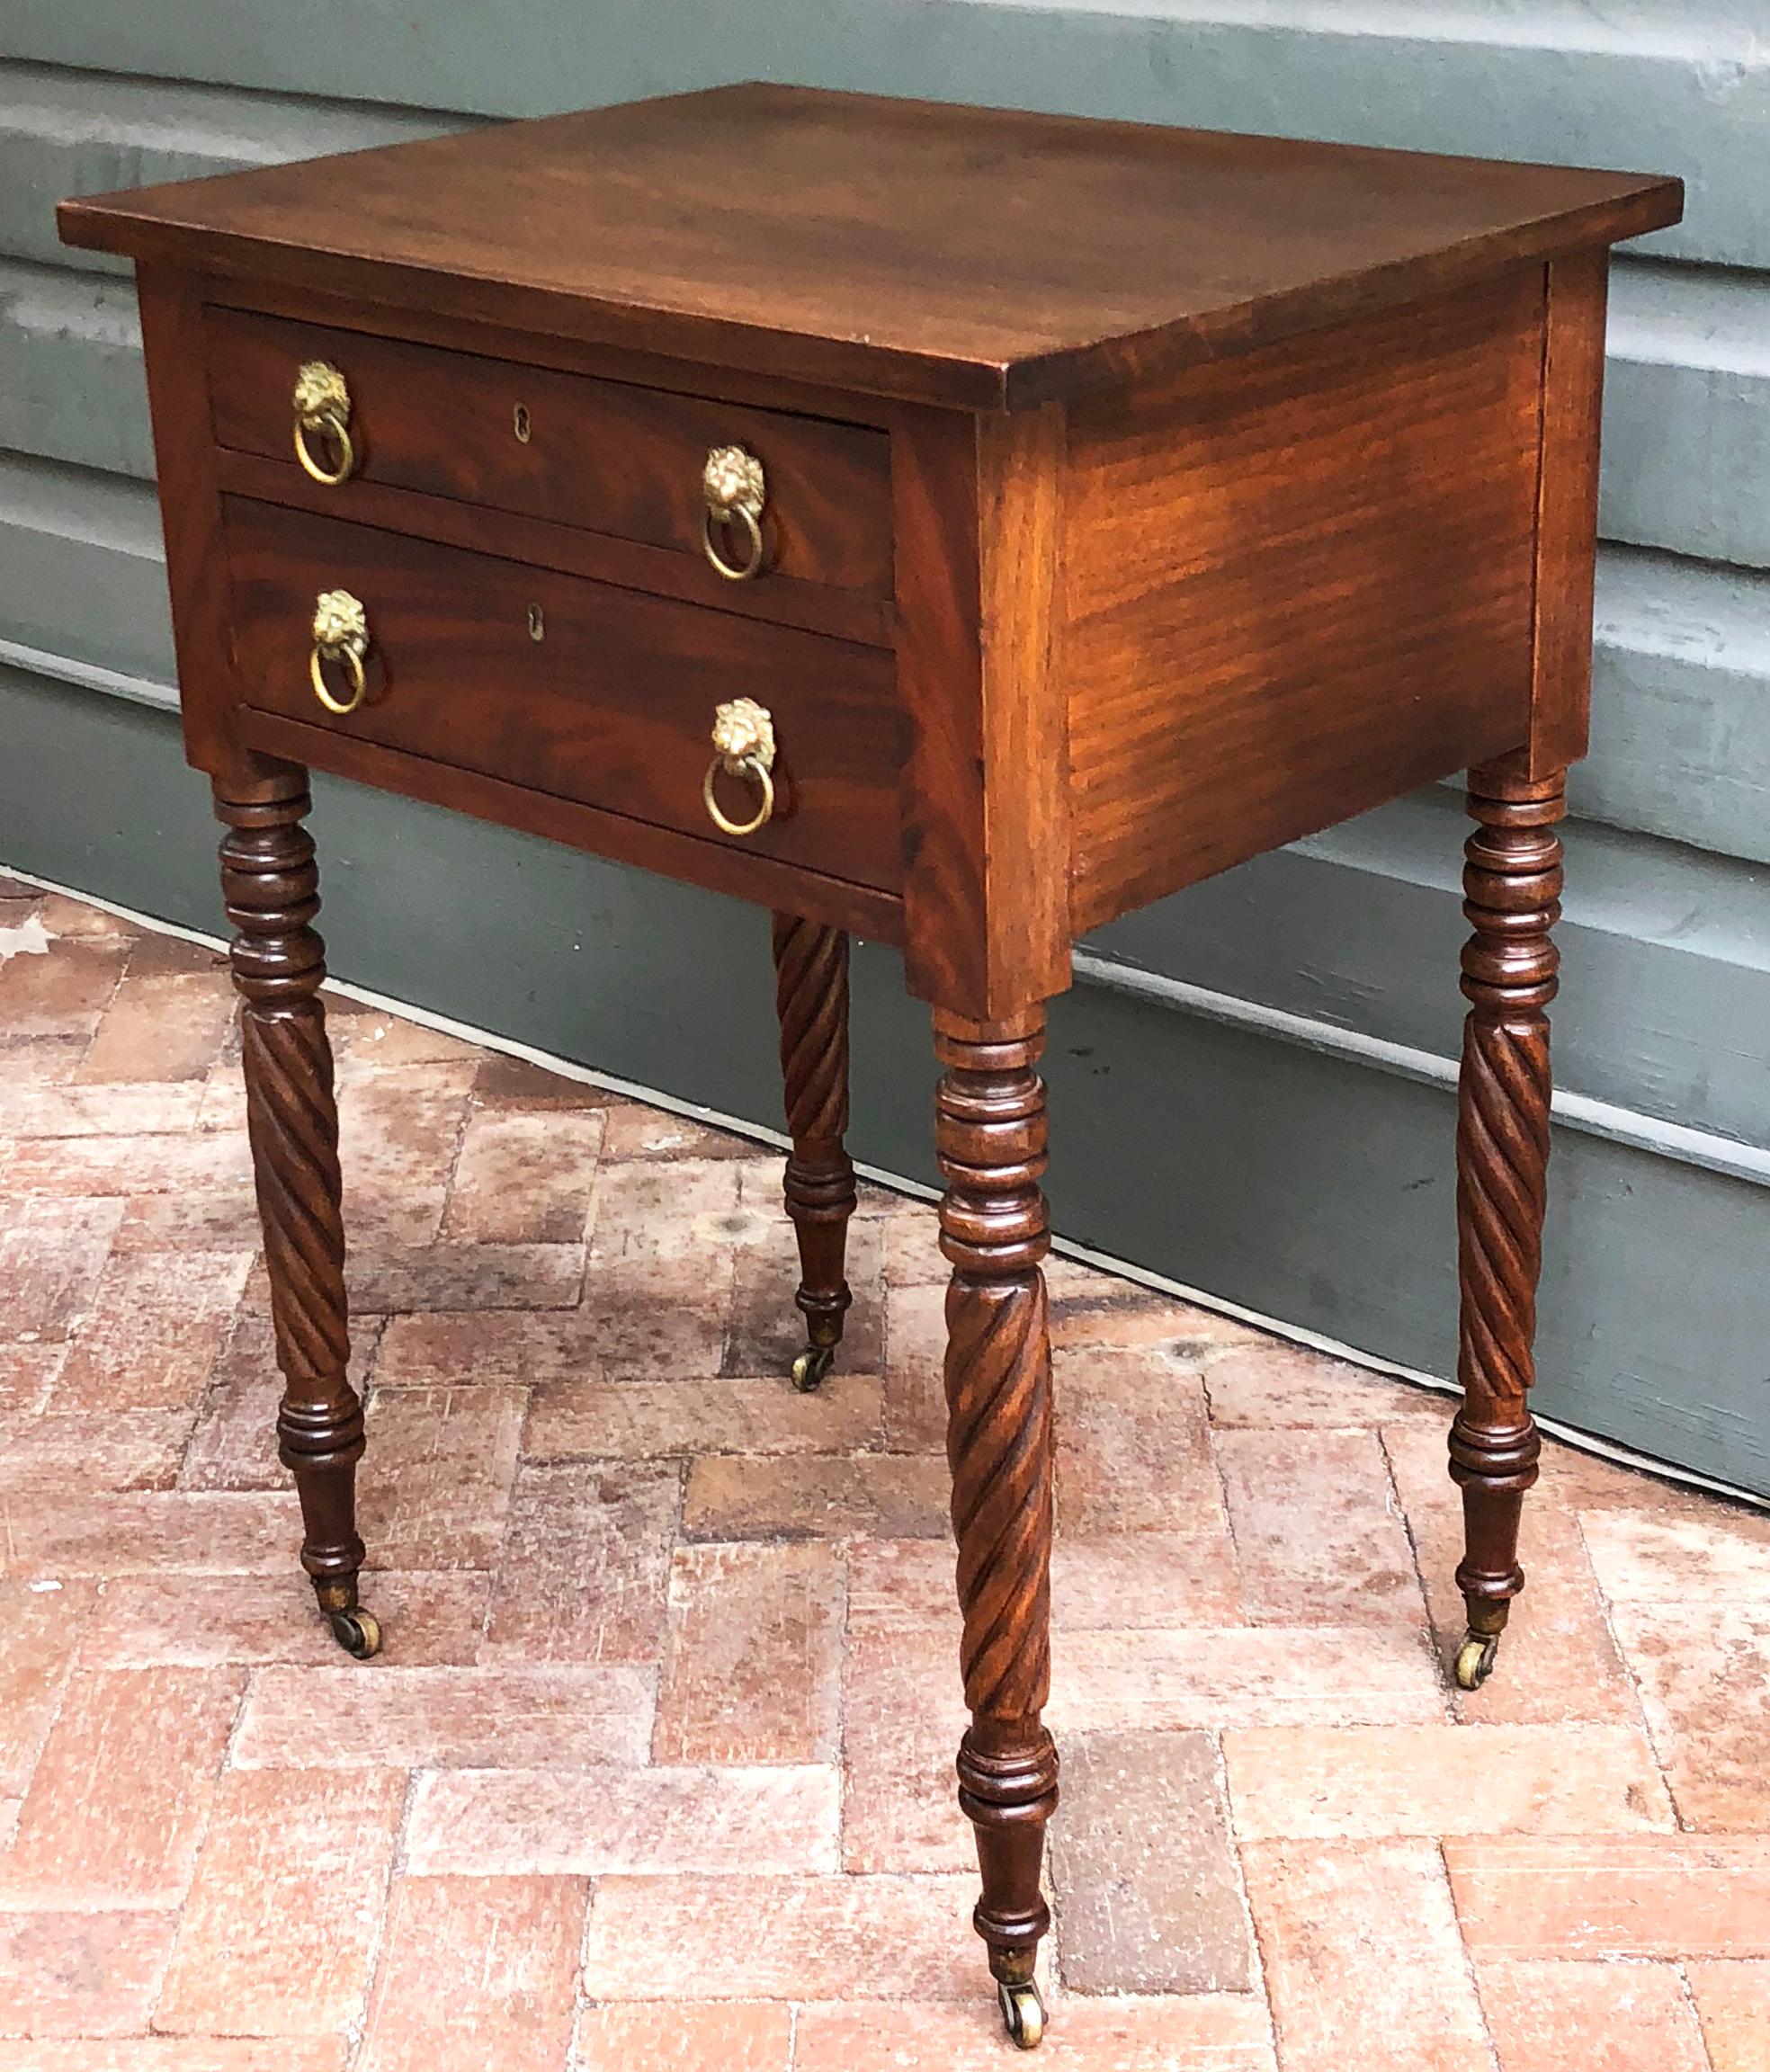 Sheraton  Early 19th Century American Mahogany Work Table with Turned Legs